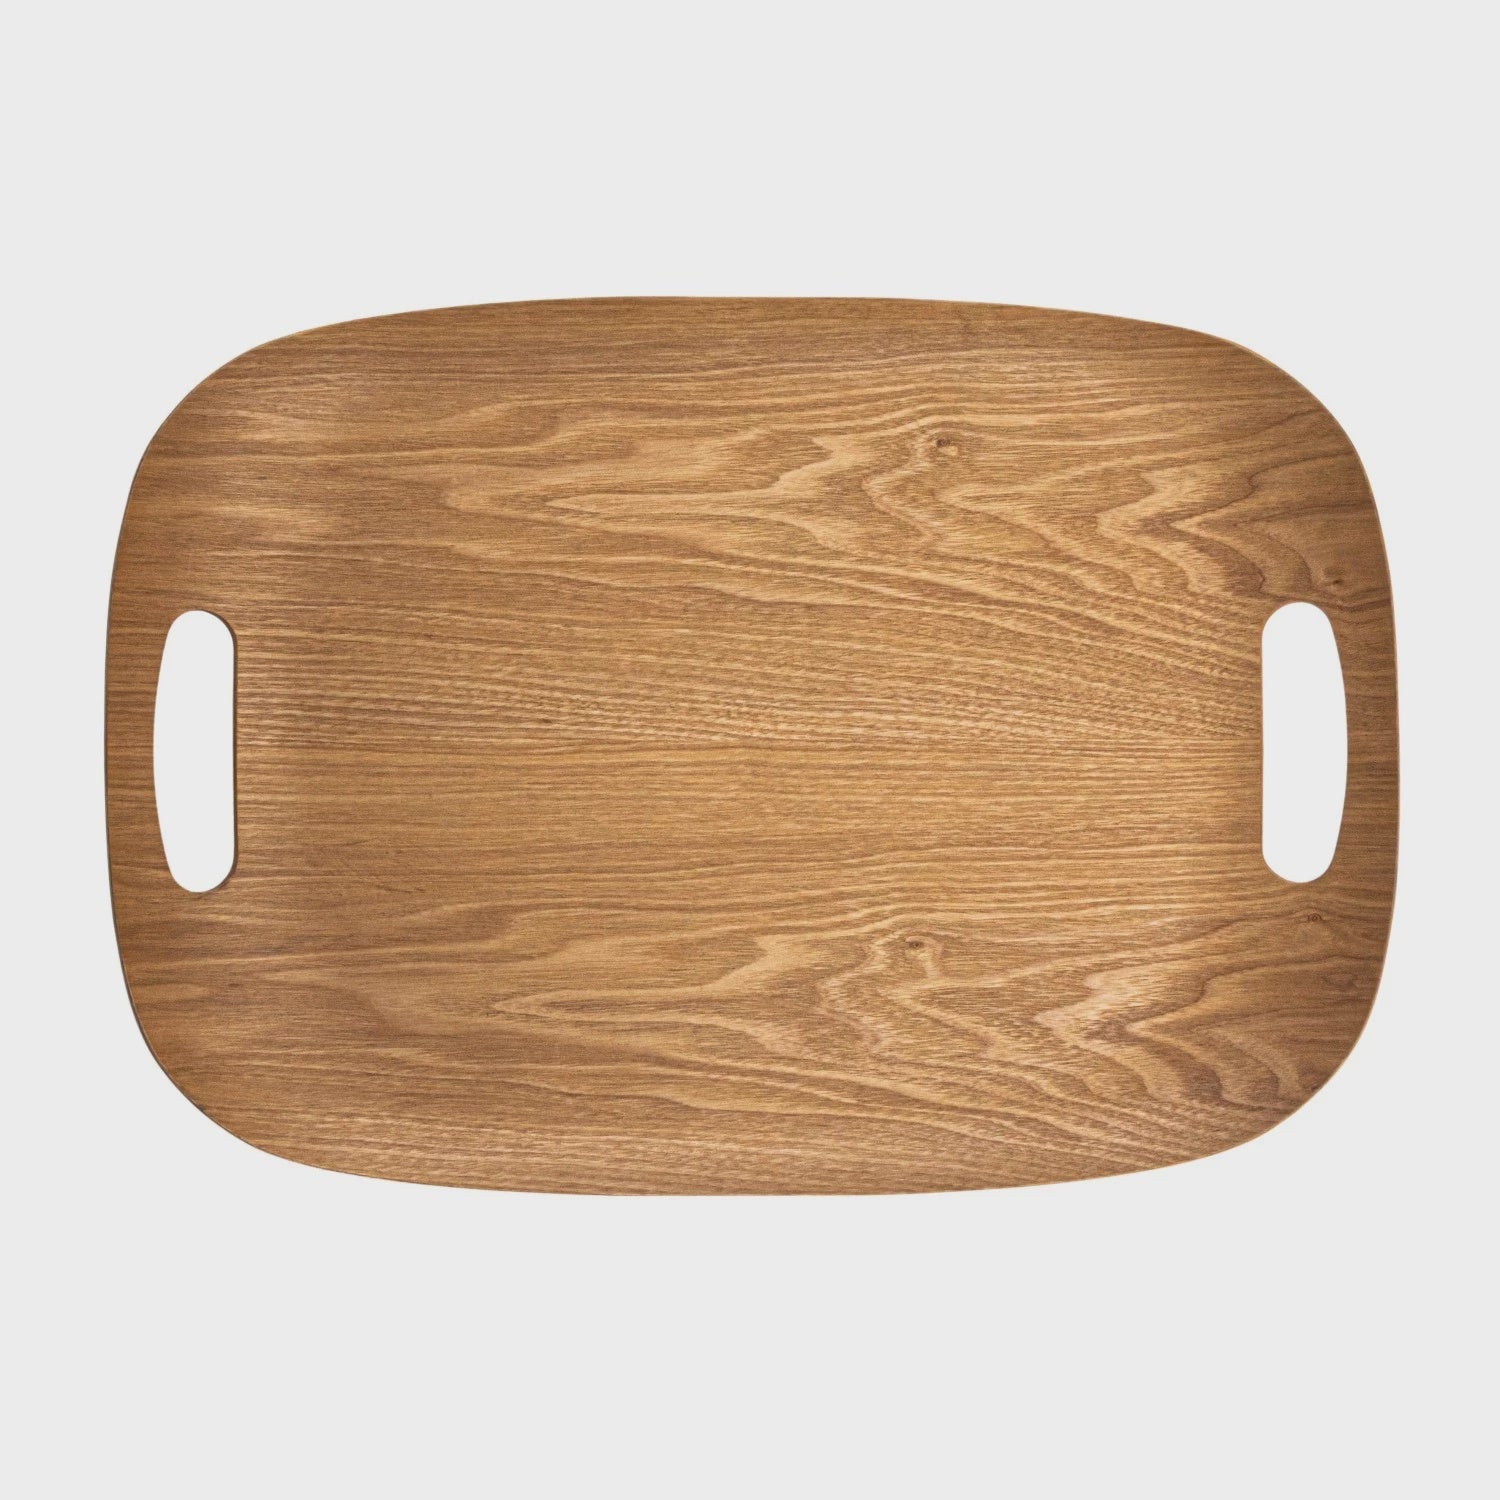 A Bloomingville Natural Oak Wood Serving Tray with a smooth finish and natural grain pattern, featuring two oval cut-out handles on its shorter sides, designed in Arizona style.